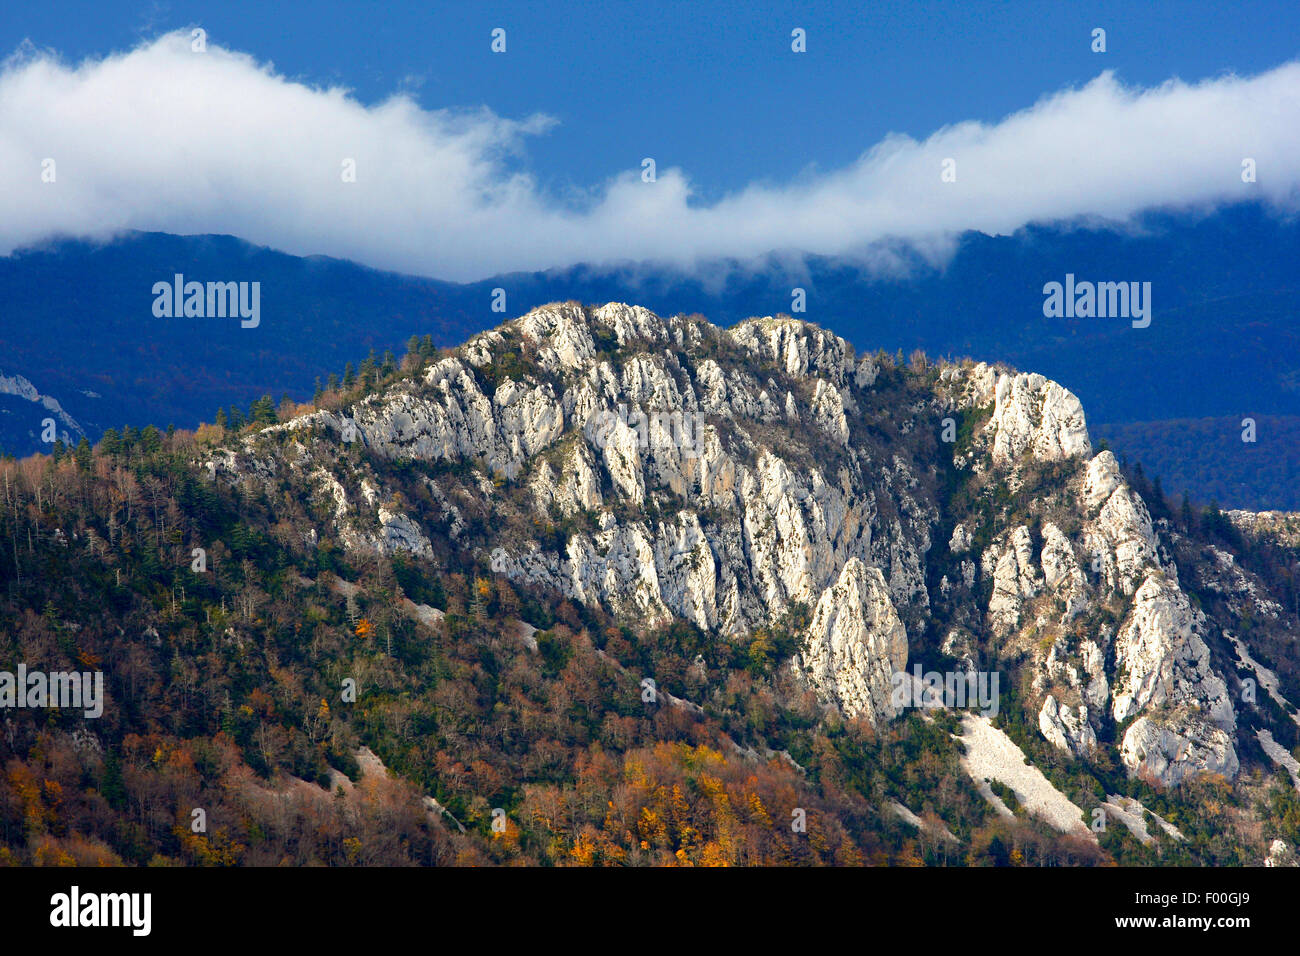 mountain peaks and rocks in mist in autumn, France, Vercors National Park Stock Photo